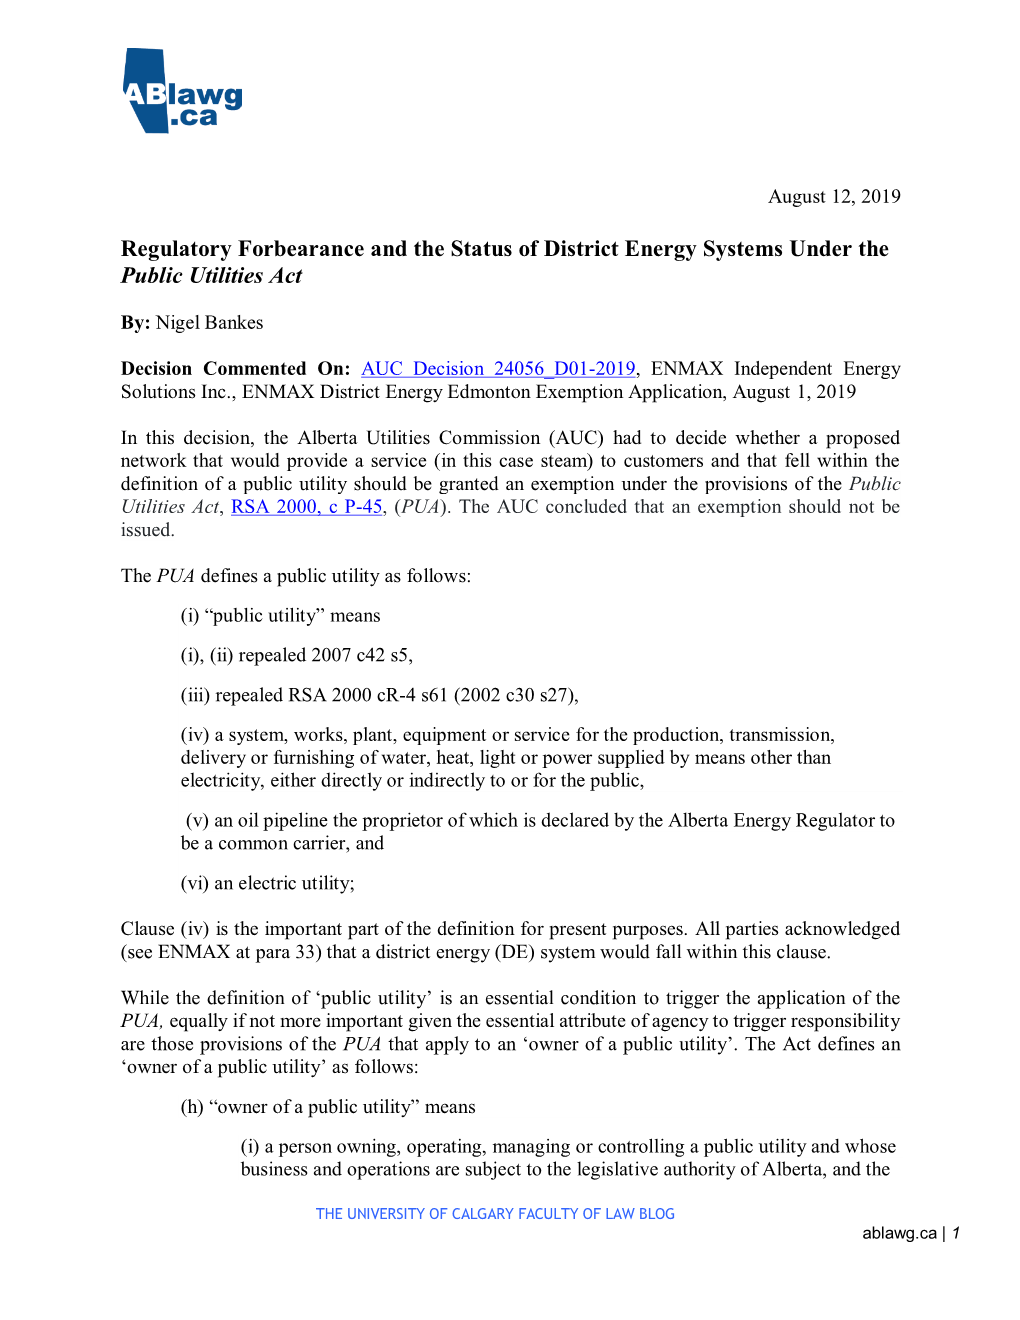 Regulatory Forbearance and the Status of District Energy Systems Under the Public Utilities Act